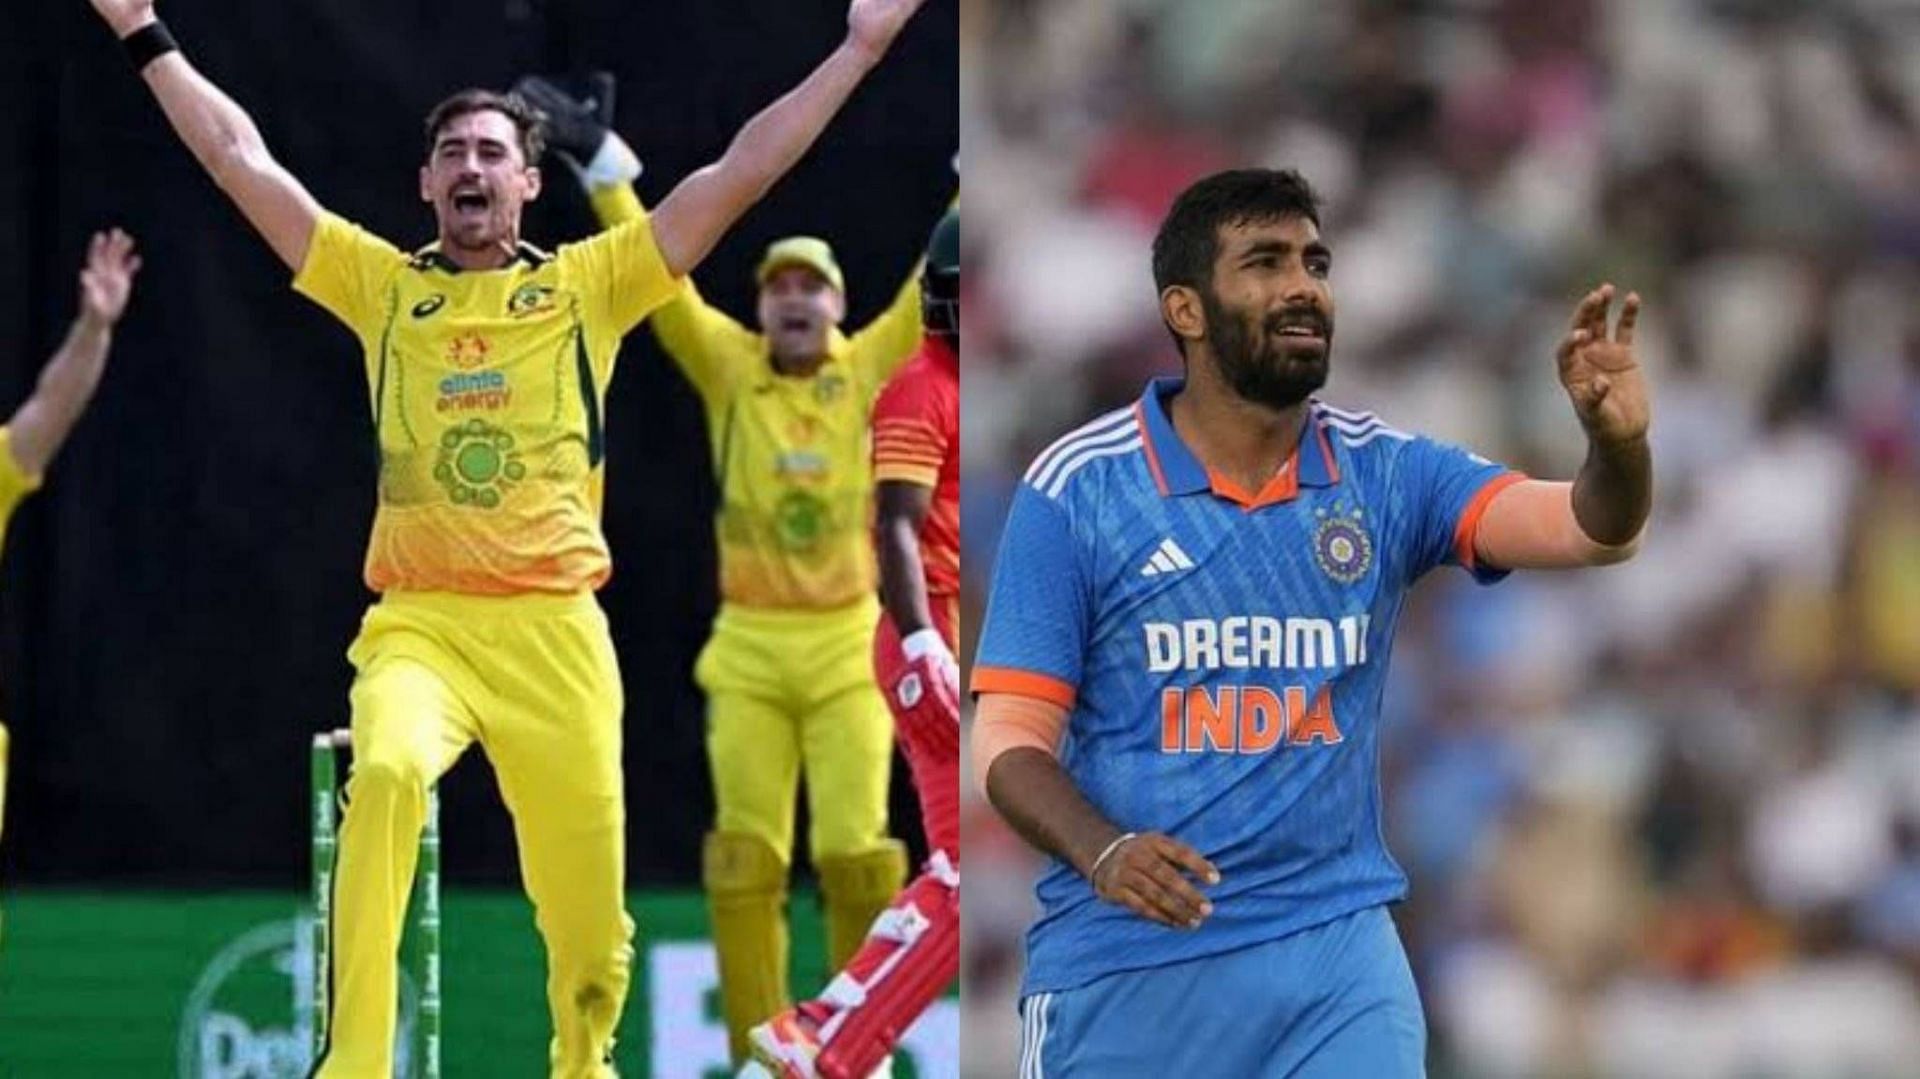 Which fast bowler will make a bigger impact on today